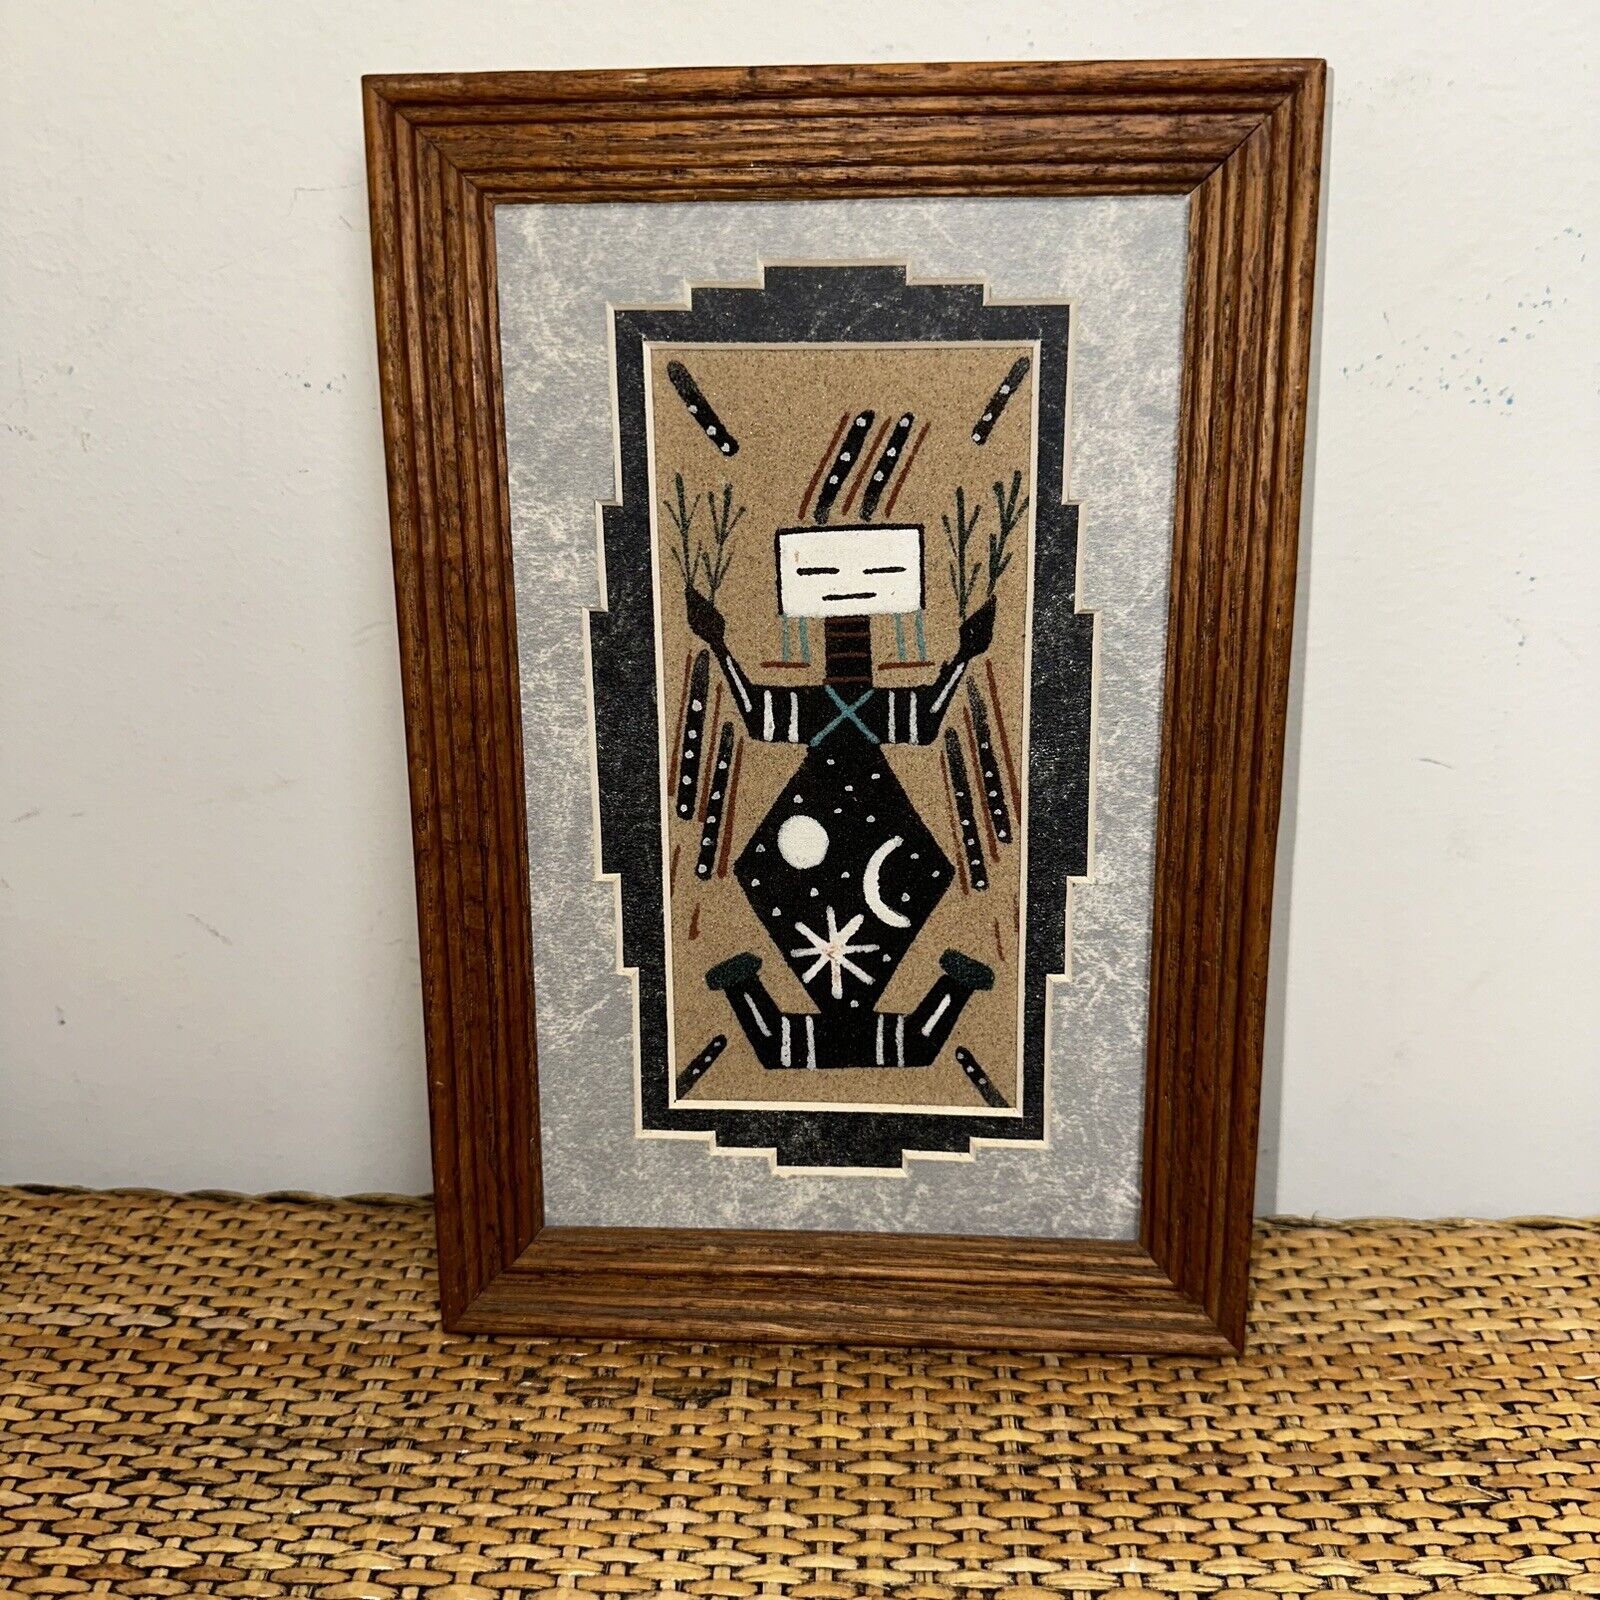 Navajo Sand Painting Father Sky Moon Stars Matted Framed Neutral Tones Certified